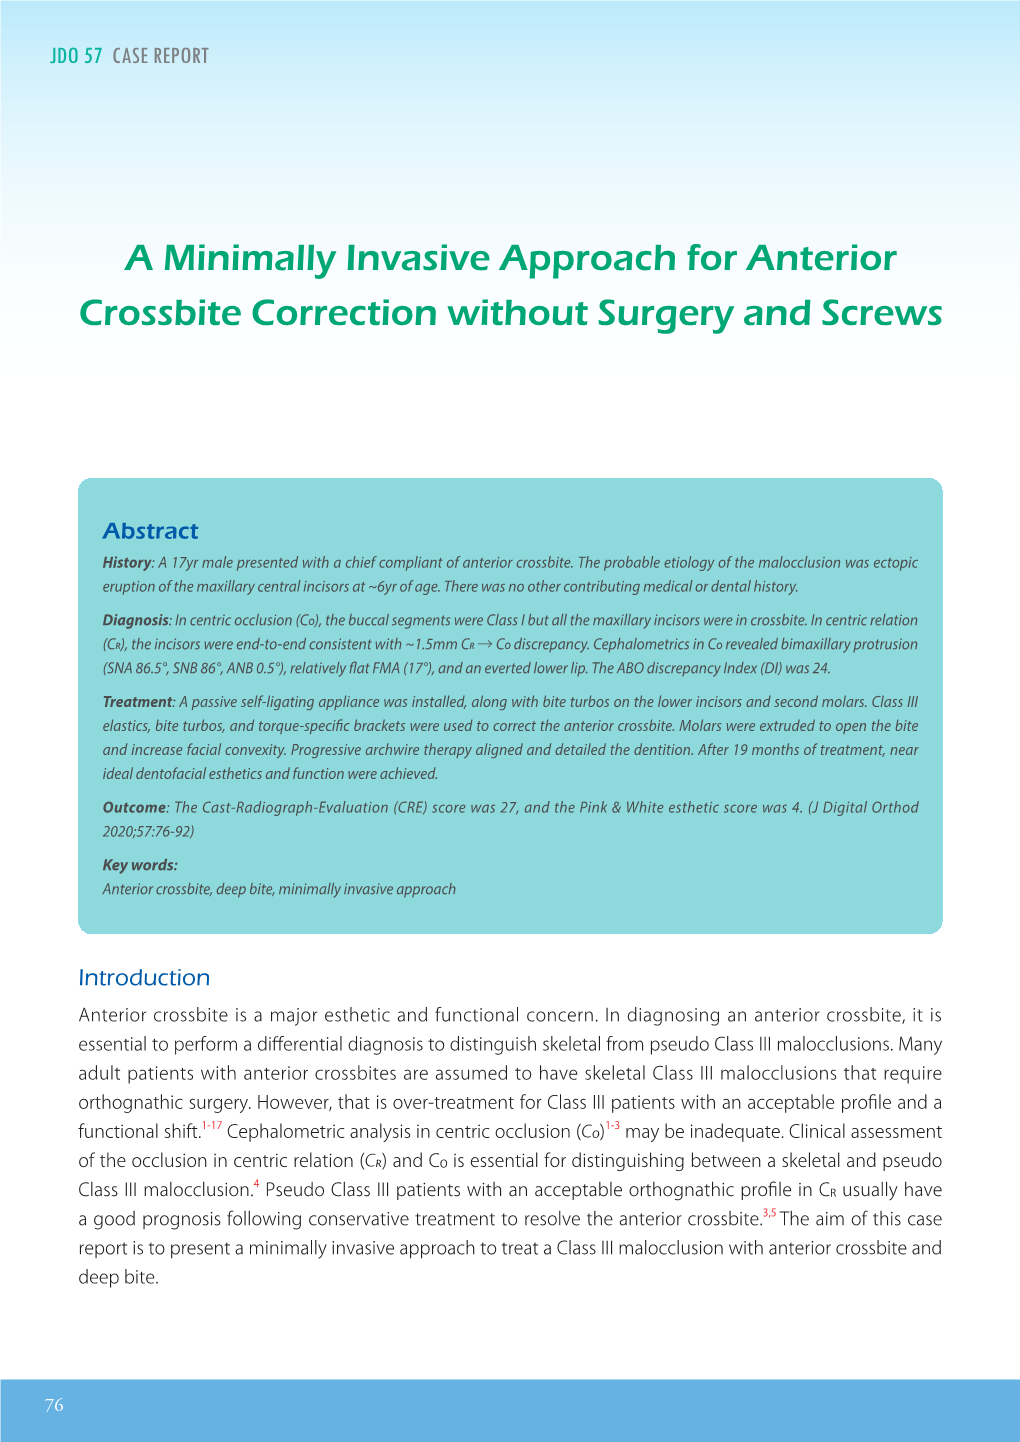 A Minimally Invasive Approach for Anterior Crossbite Correction